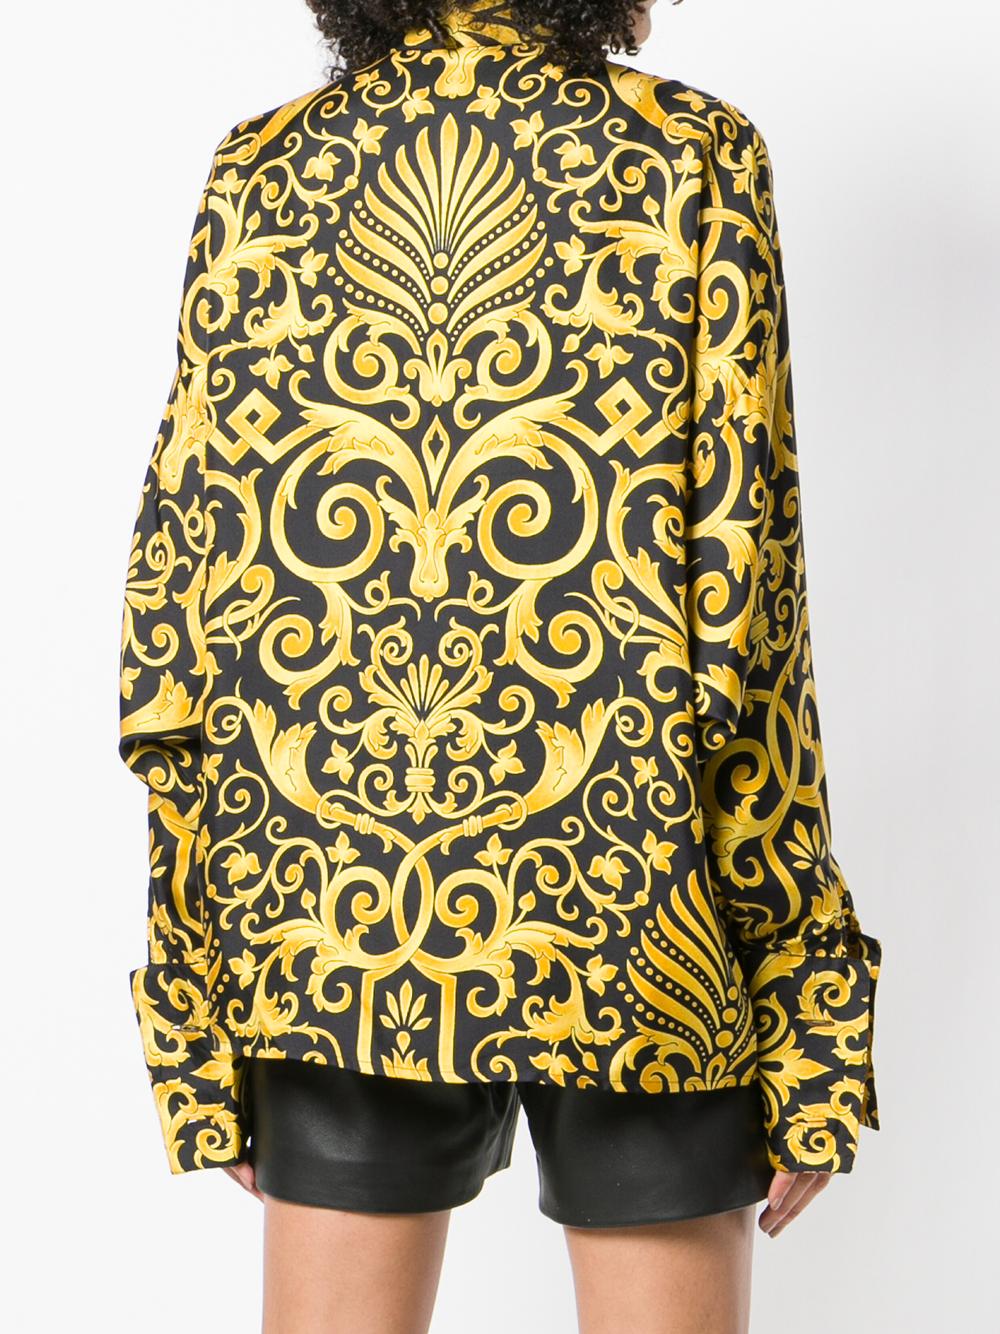 The stylish and iconic Gianni Versace silk oversize shirt features a gold and black baroque printed pattern and a single gold-tone button at collar. With fly front buttoned fastening and double cuffs, the Versace shirt was designed in 1980s.
The